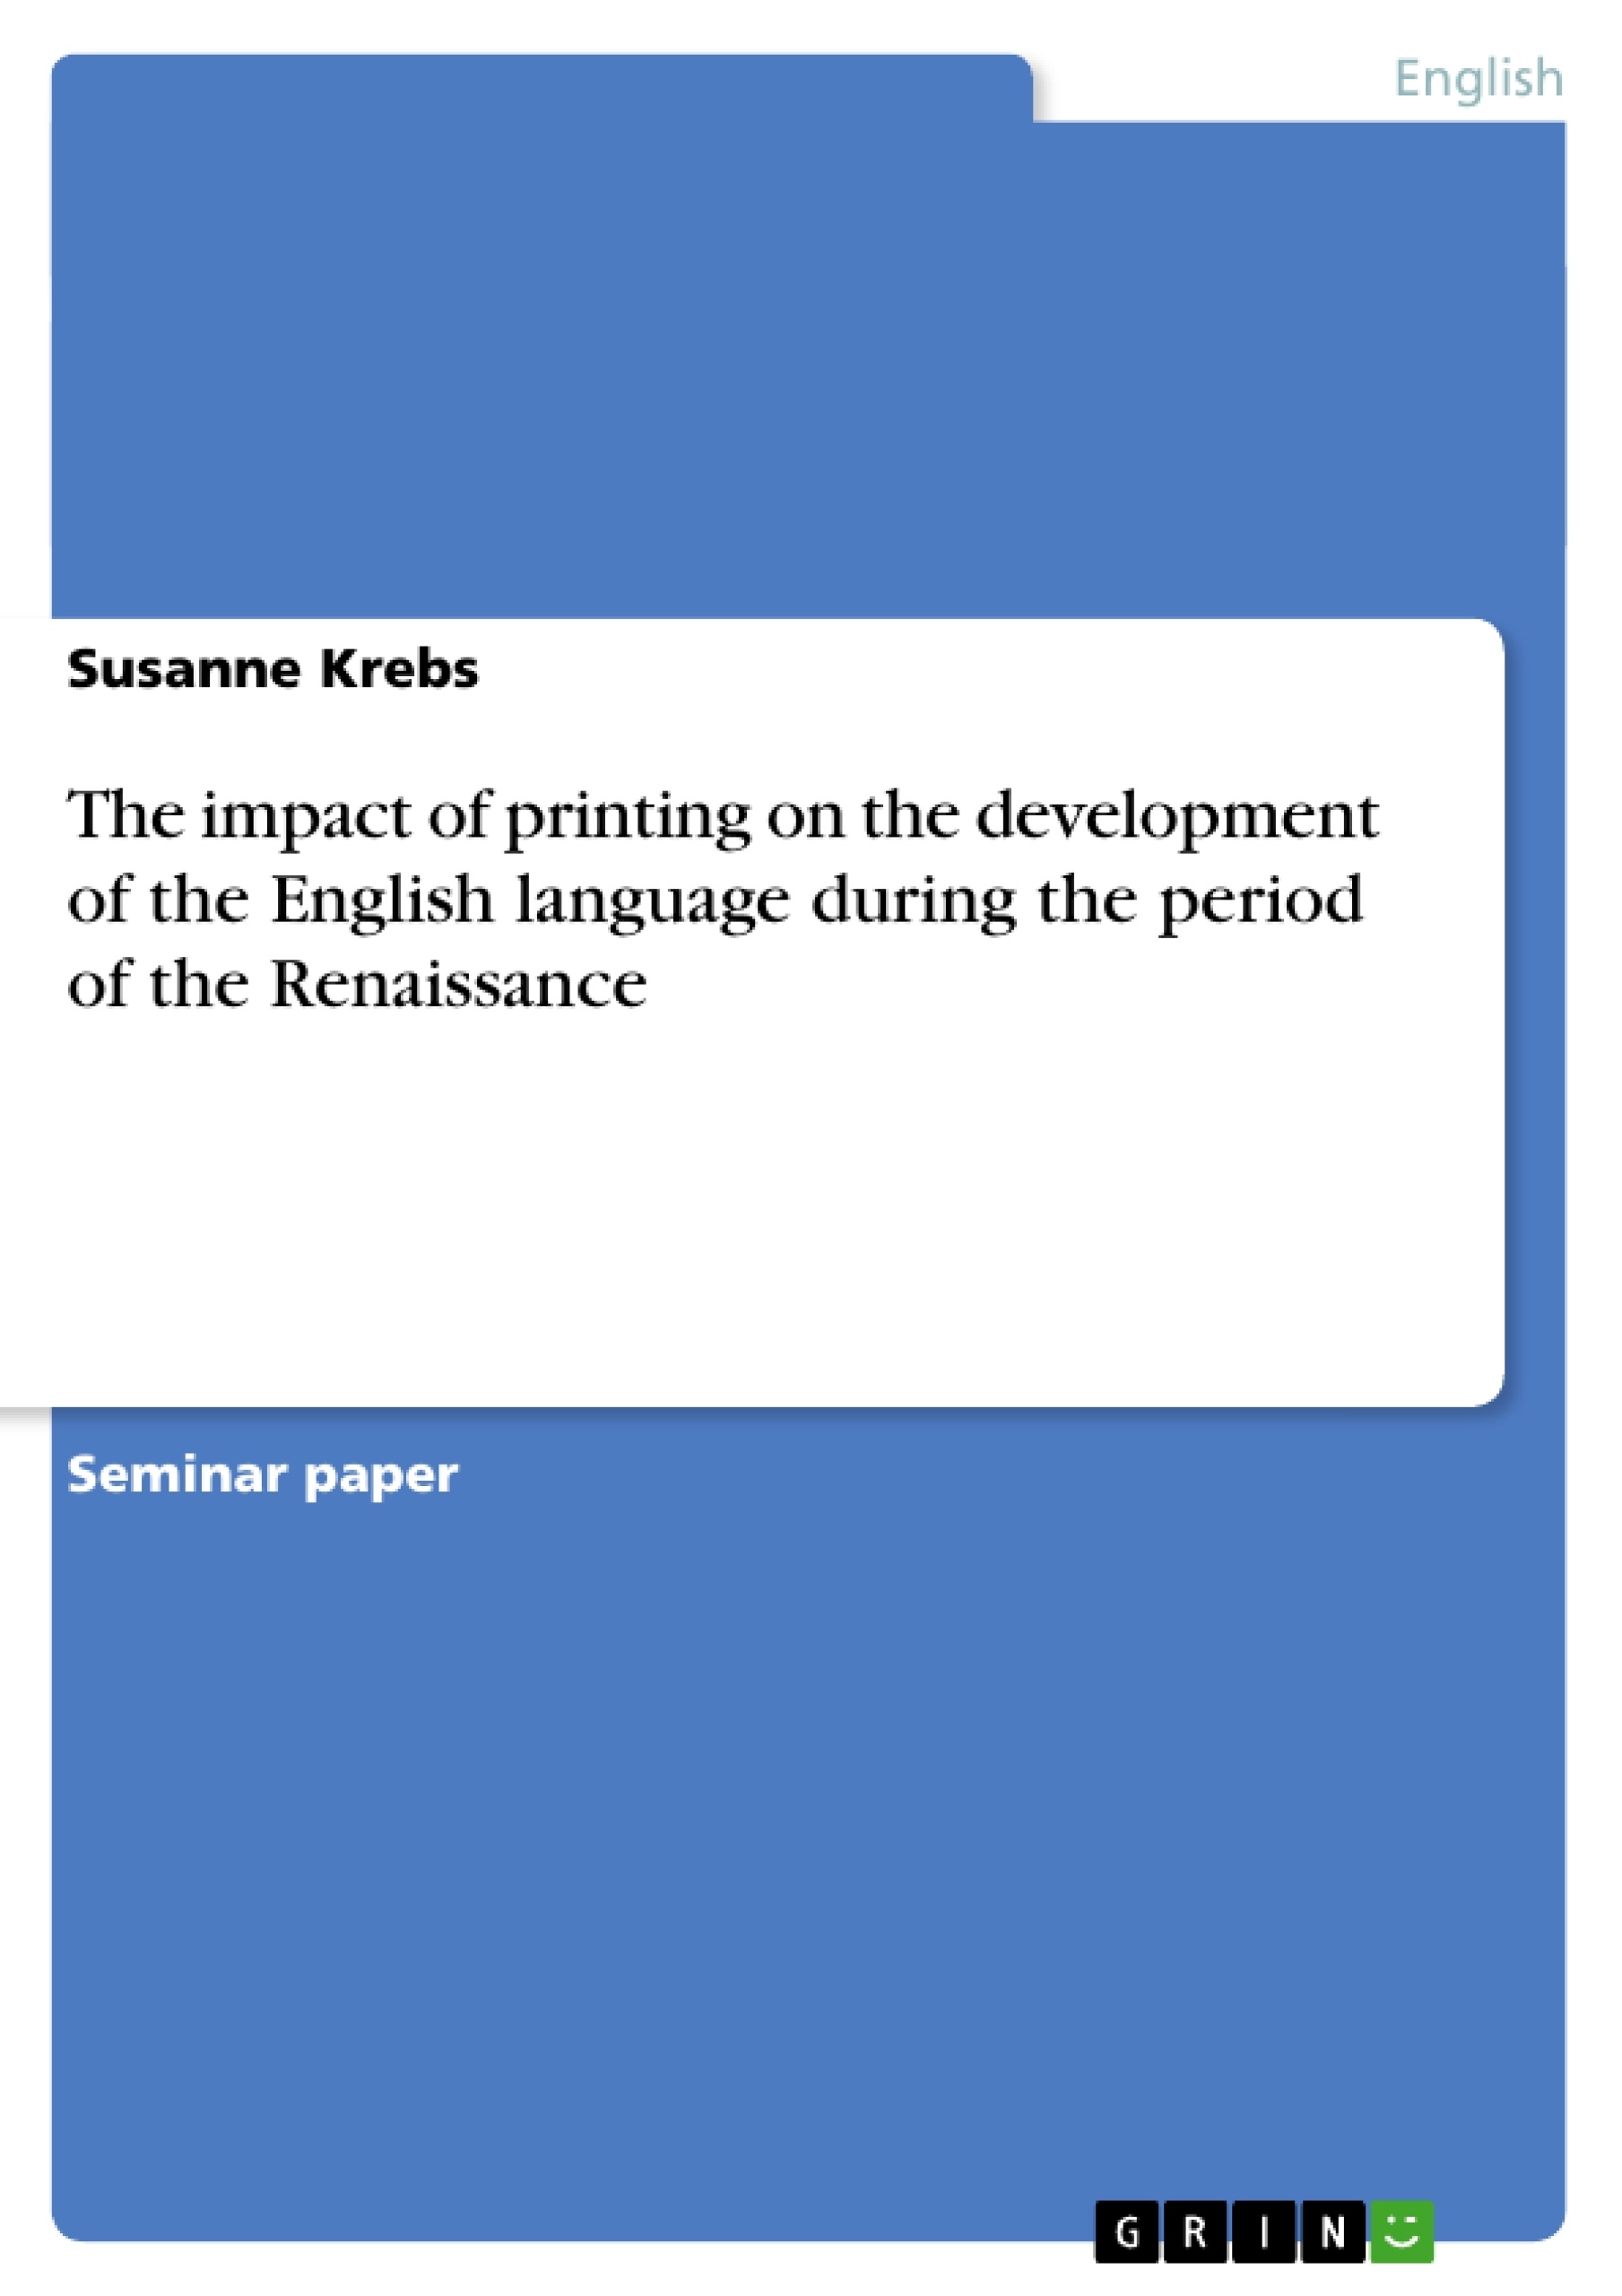 Título: The impact of printing on the development of the English language during the period of the Renaissance